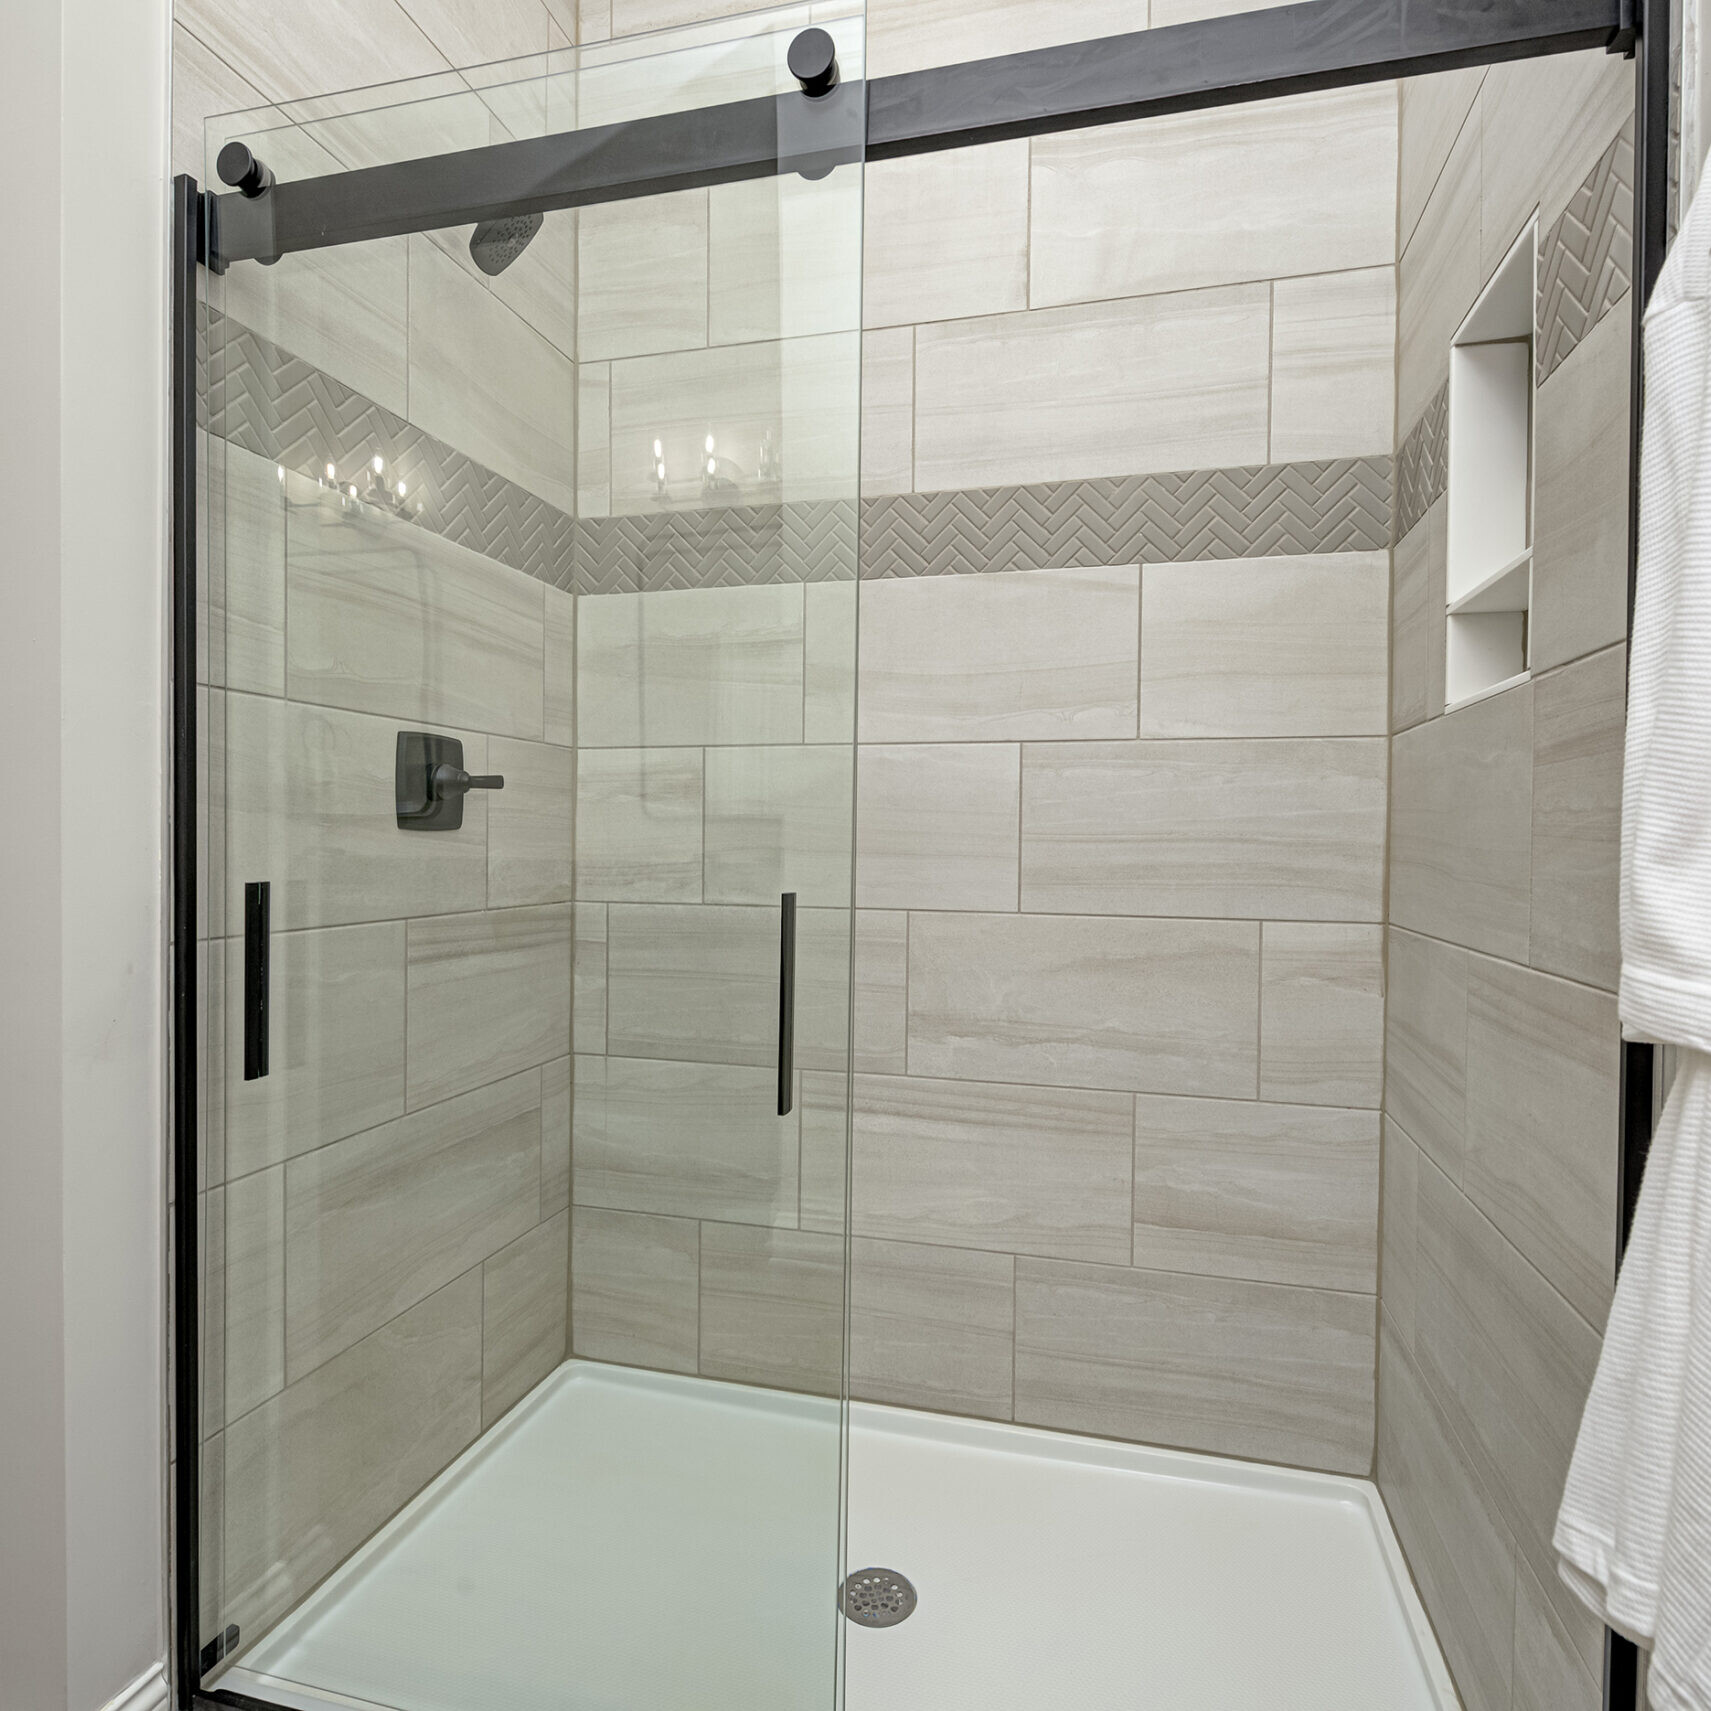 A Indianapolis custom home bathroom with a glass shower door.